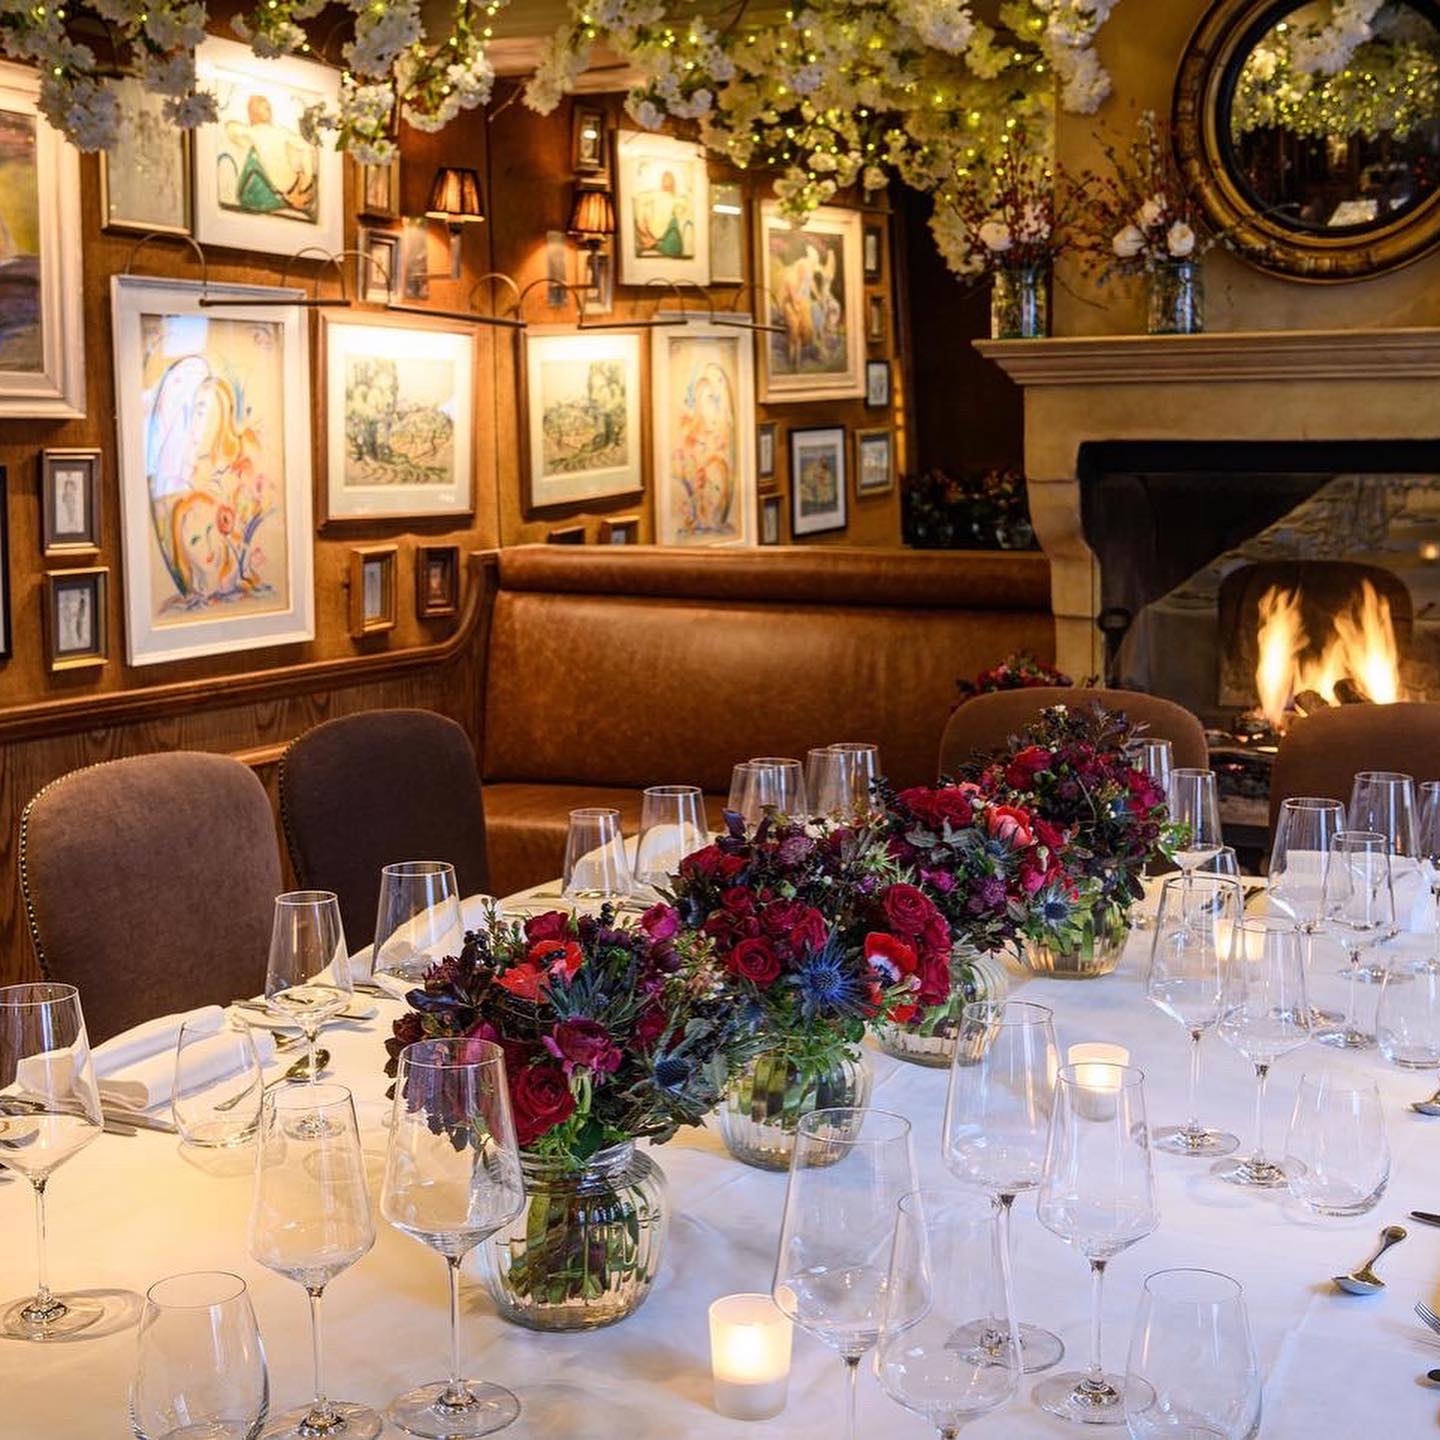 With sumptuous wood panelling, a roaring log fire and sweeping views over Covent Garden, the intimate dining room evokes a rich, warm and inviting atmosphere